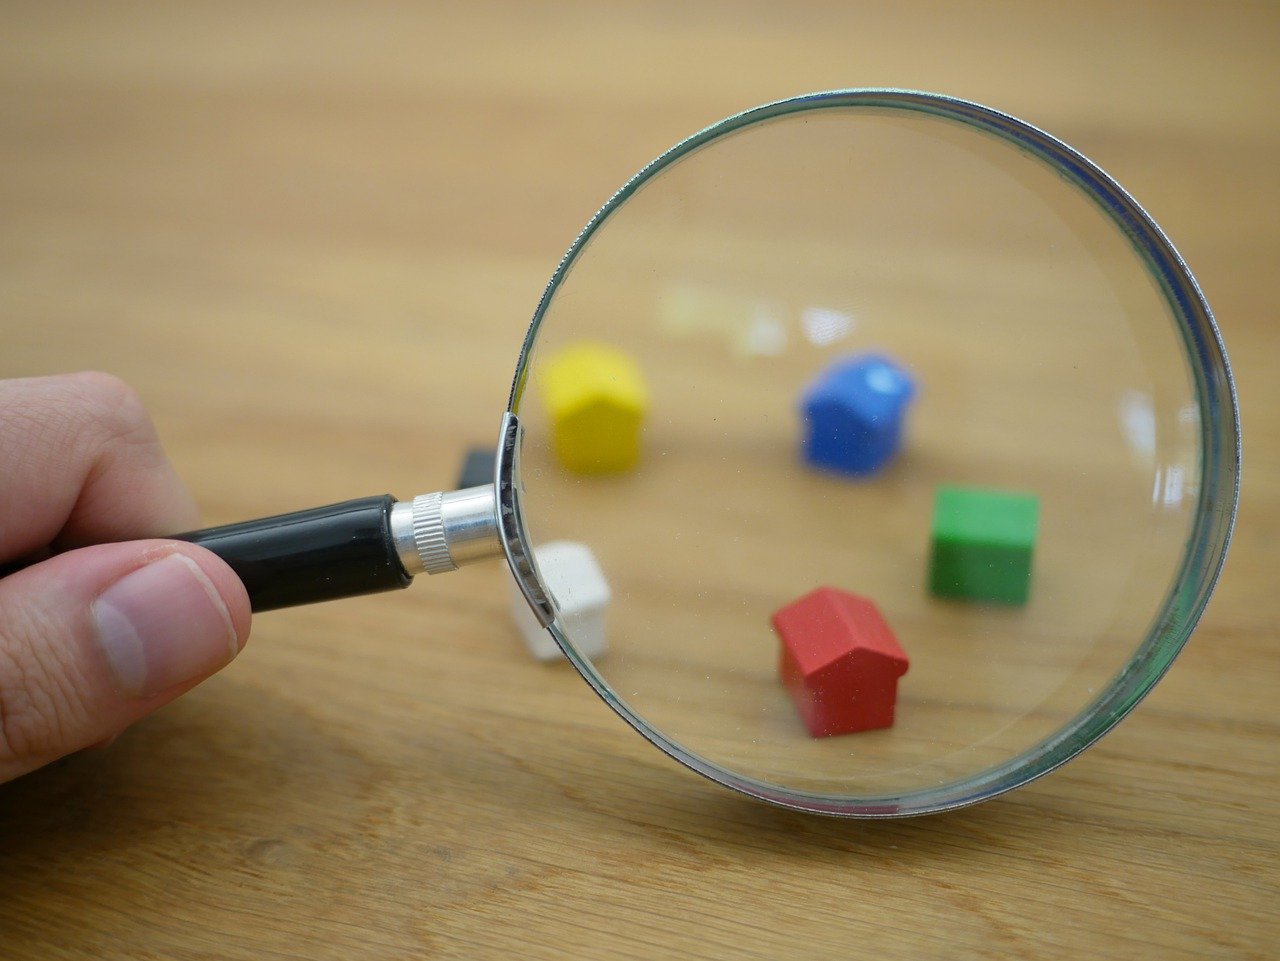 Hand holding magnifying glass in front of Monopoly house pieces.